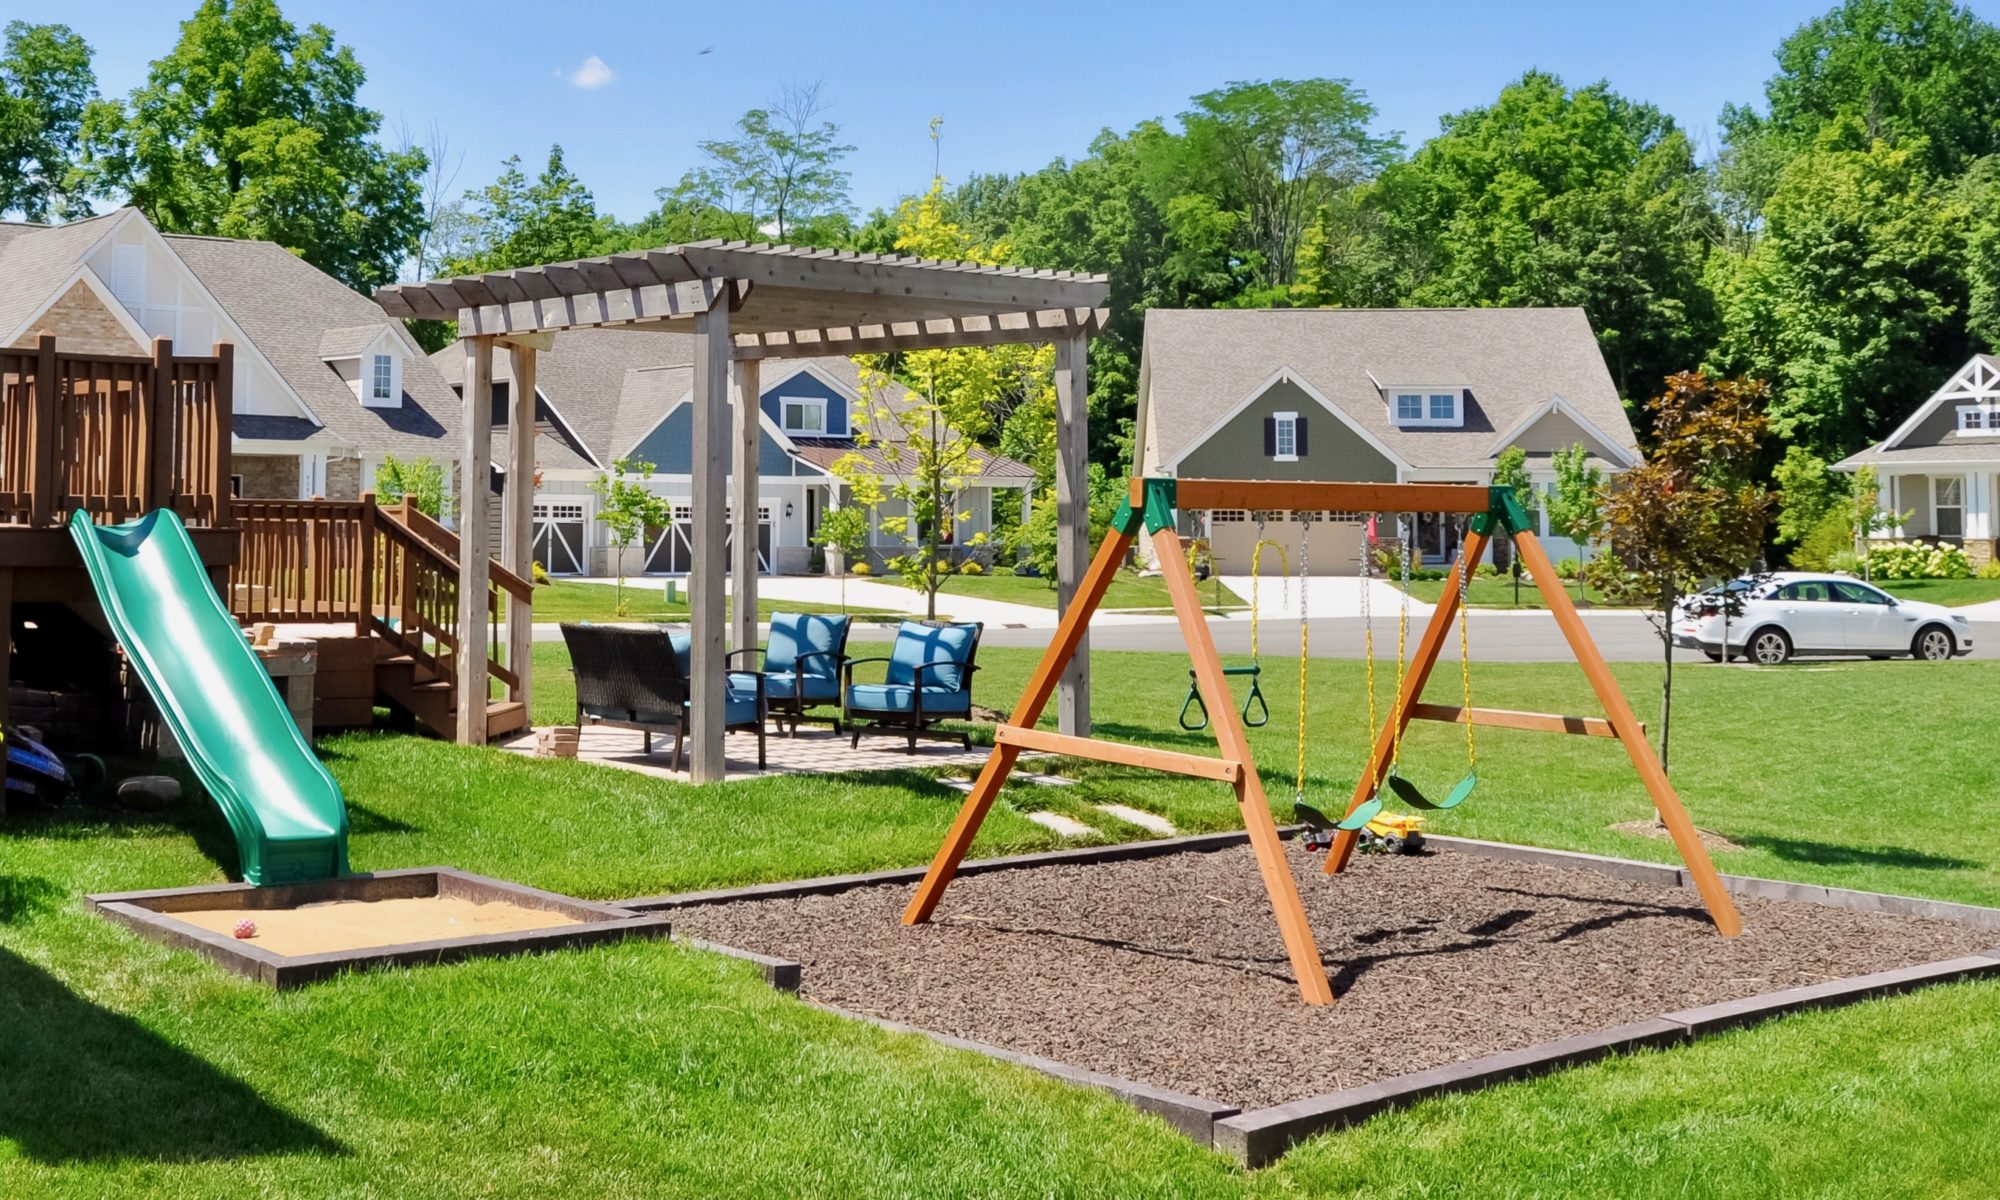 Precision Outdoors Fishers Pergola & Firepit cedar pergola structure firm paver patio beggar lafitt rustic slab Danville beige color accents wrap around firepit bench seating kids play area slide built in built-in deck sandbox play pad surrounding swing set area fishers indiana playground